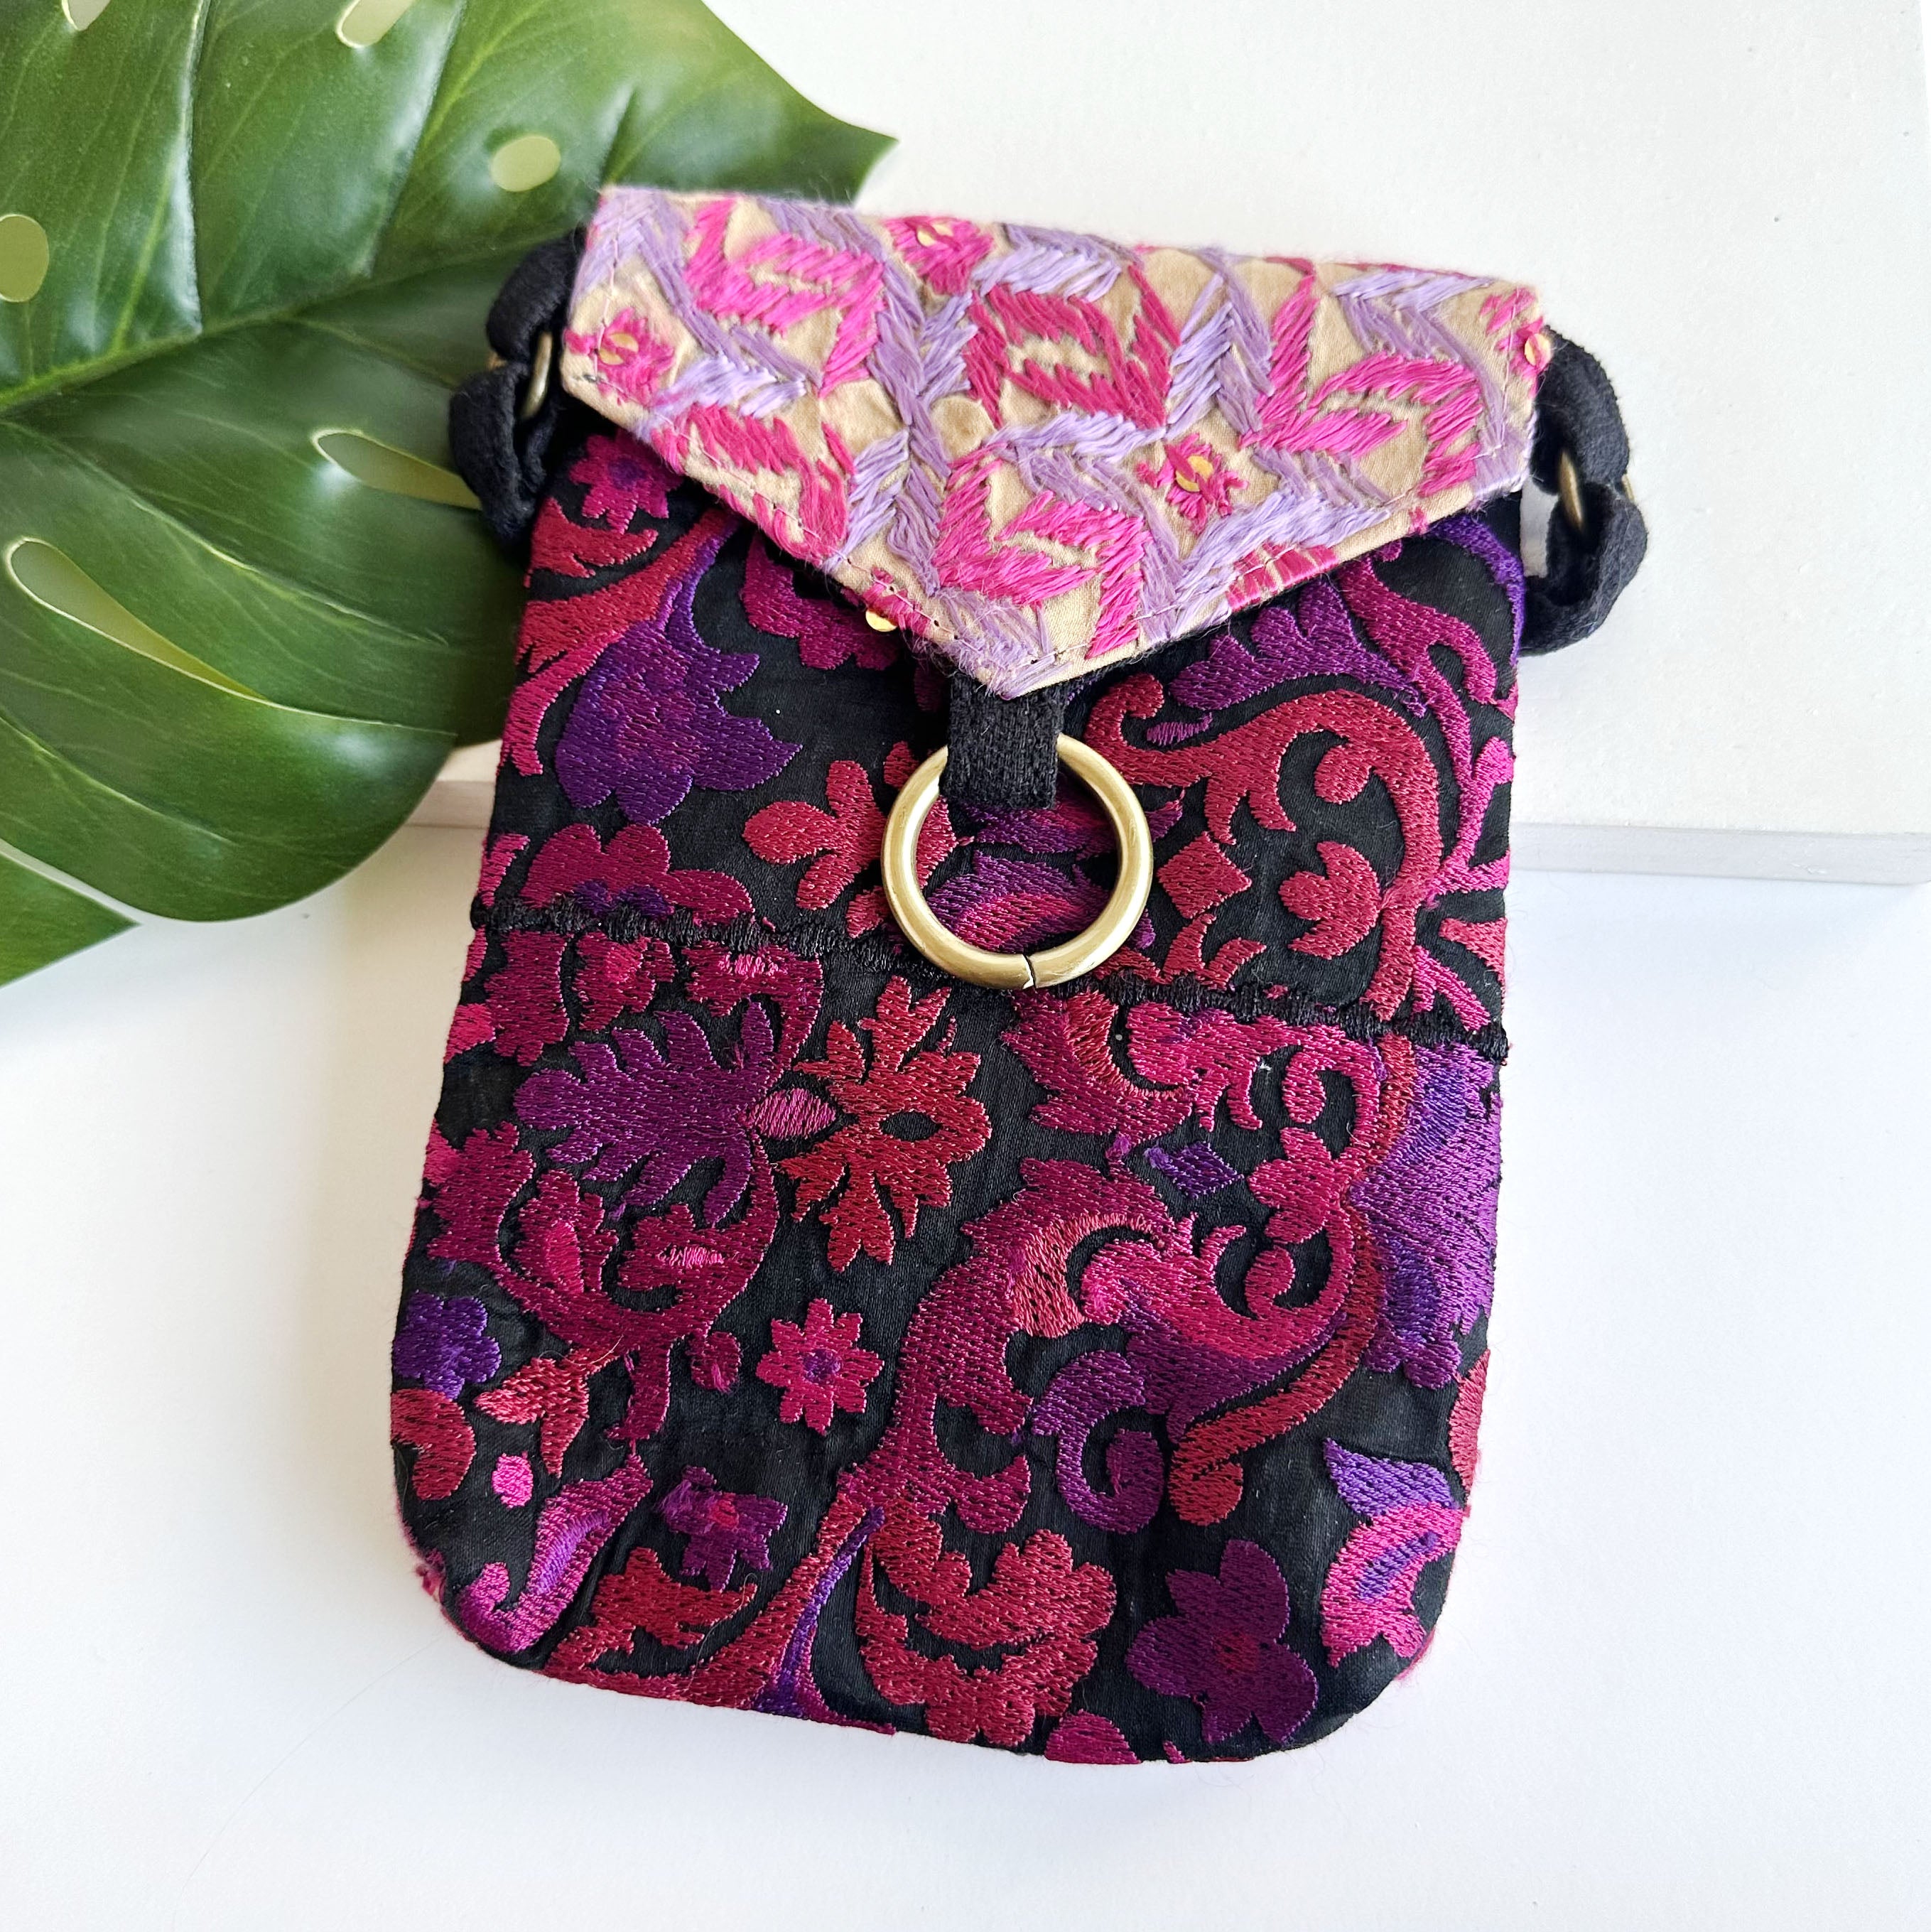 How to Sew a Cell Phone Bag and Free Pattern - Threads